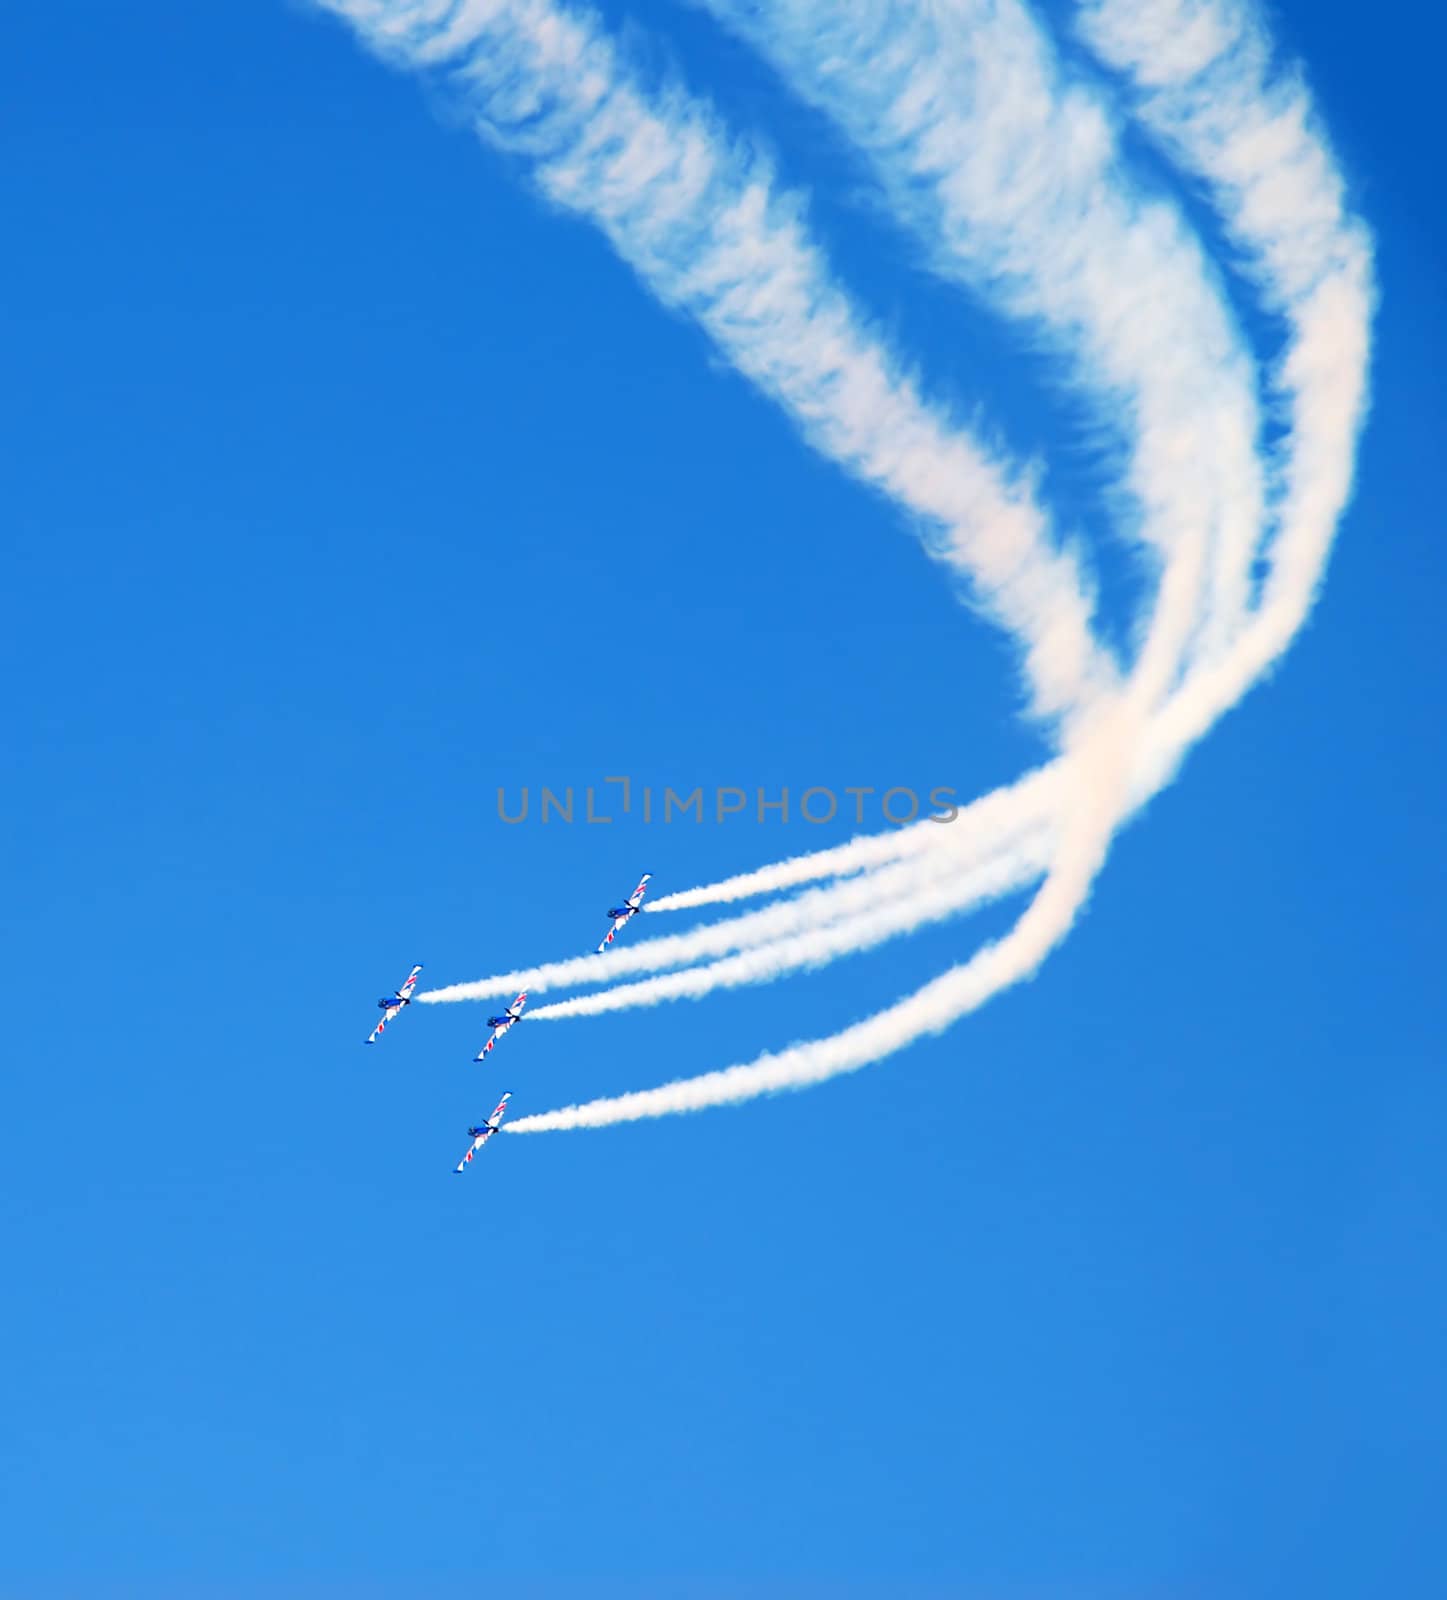 planes group in acrobatic flight with smoke trace over blue sky